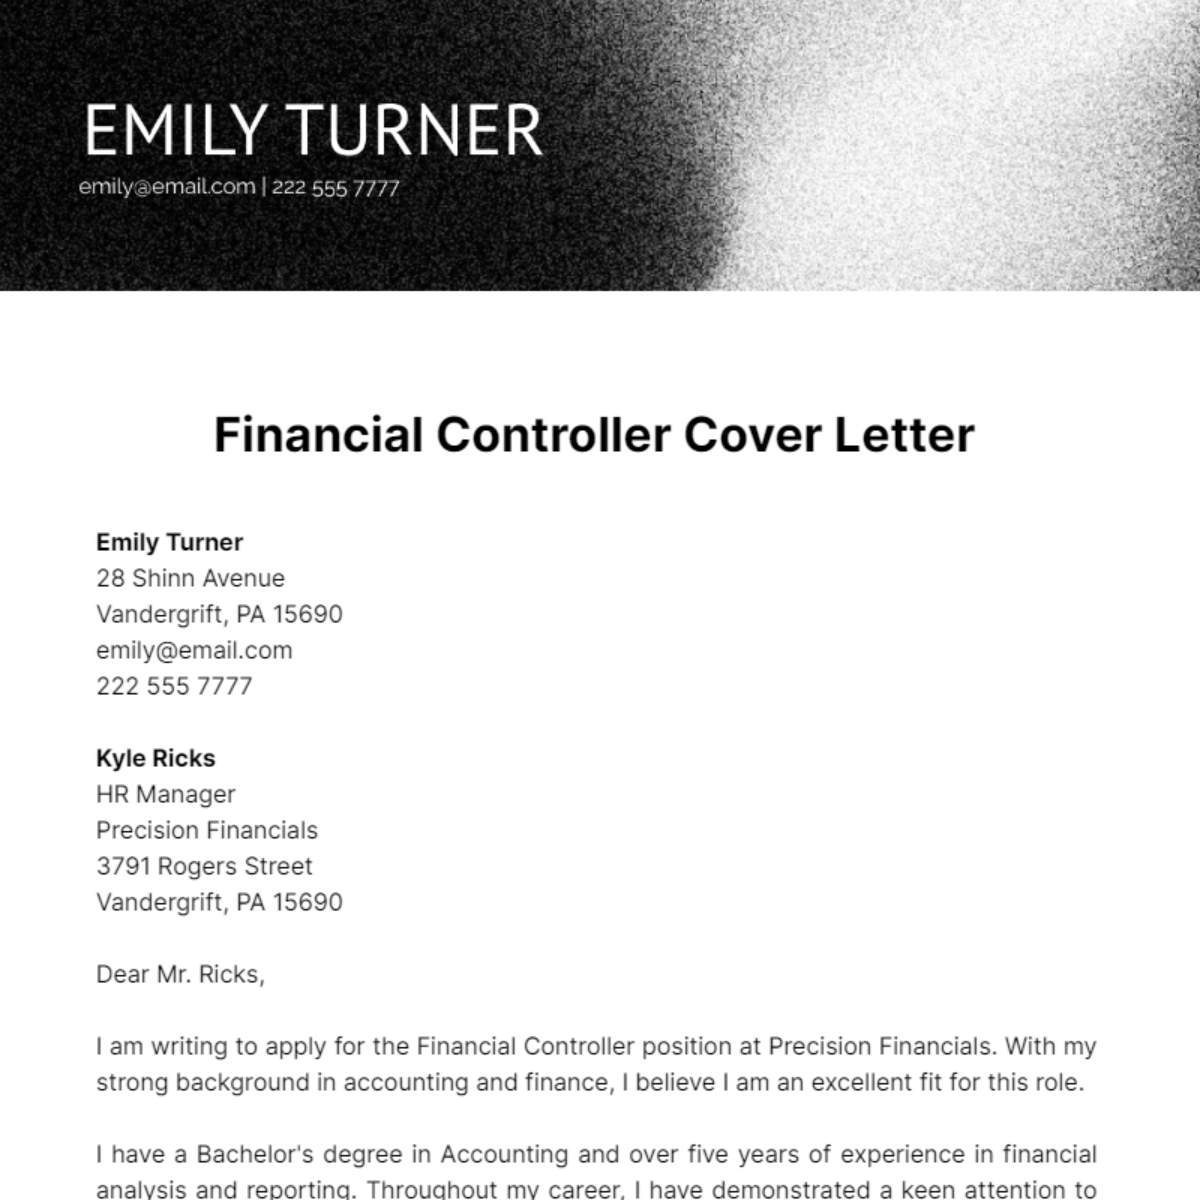 Financial Controller Cover Letter Template